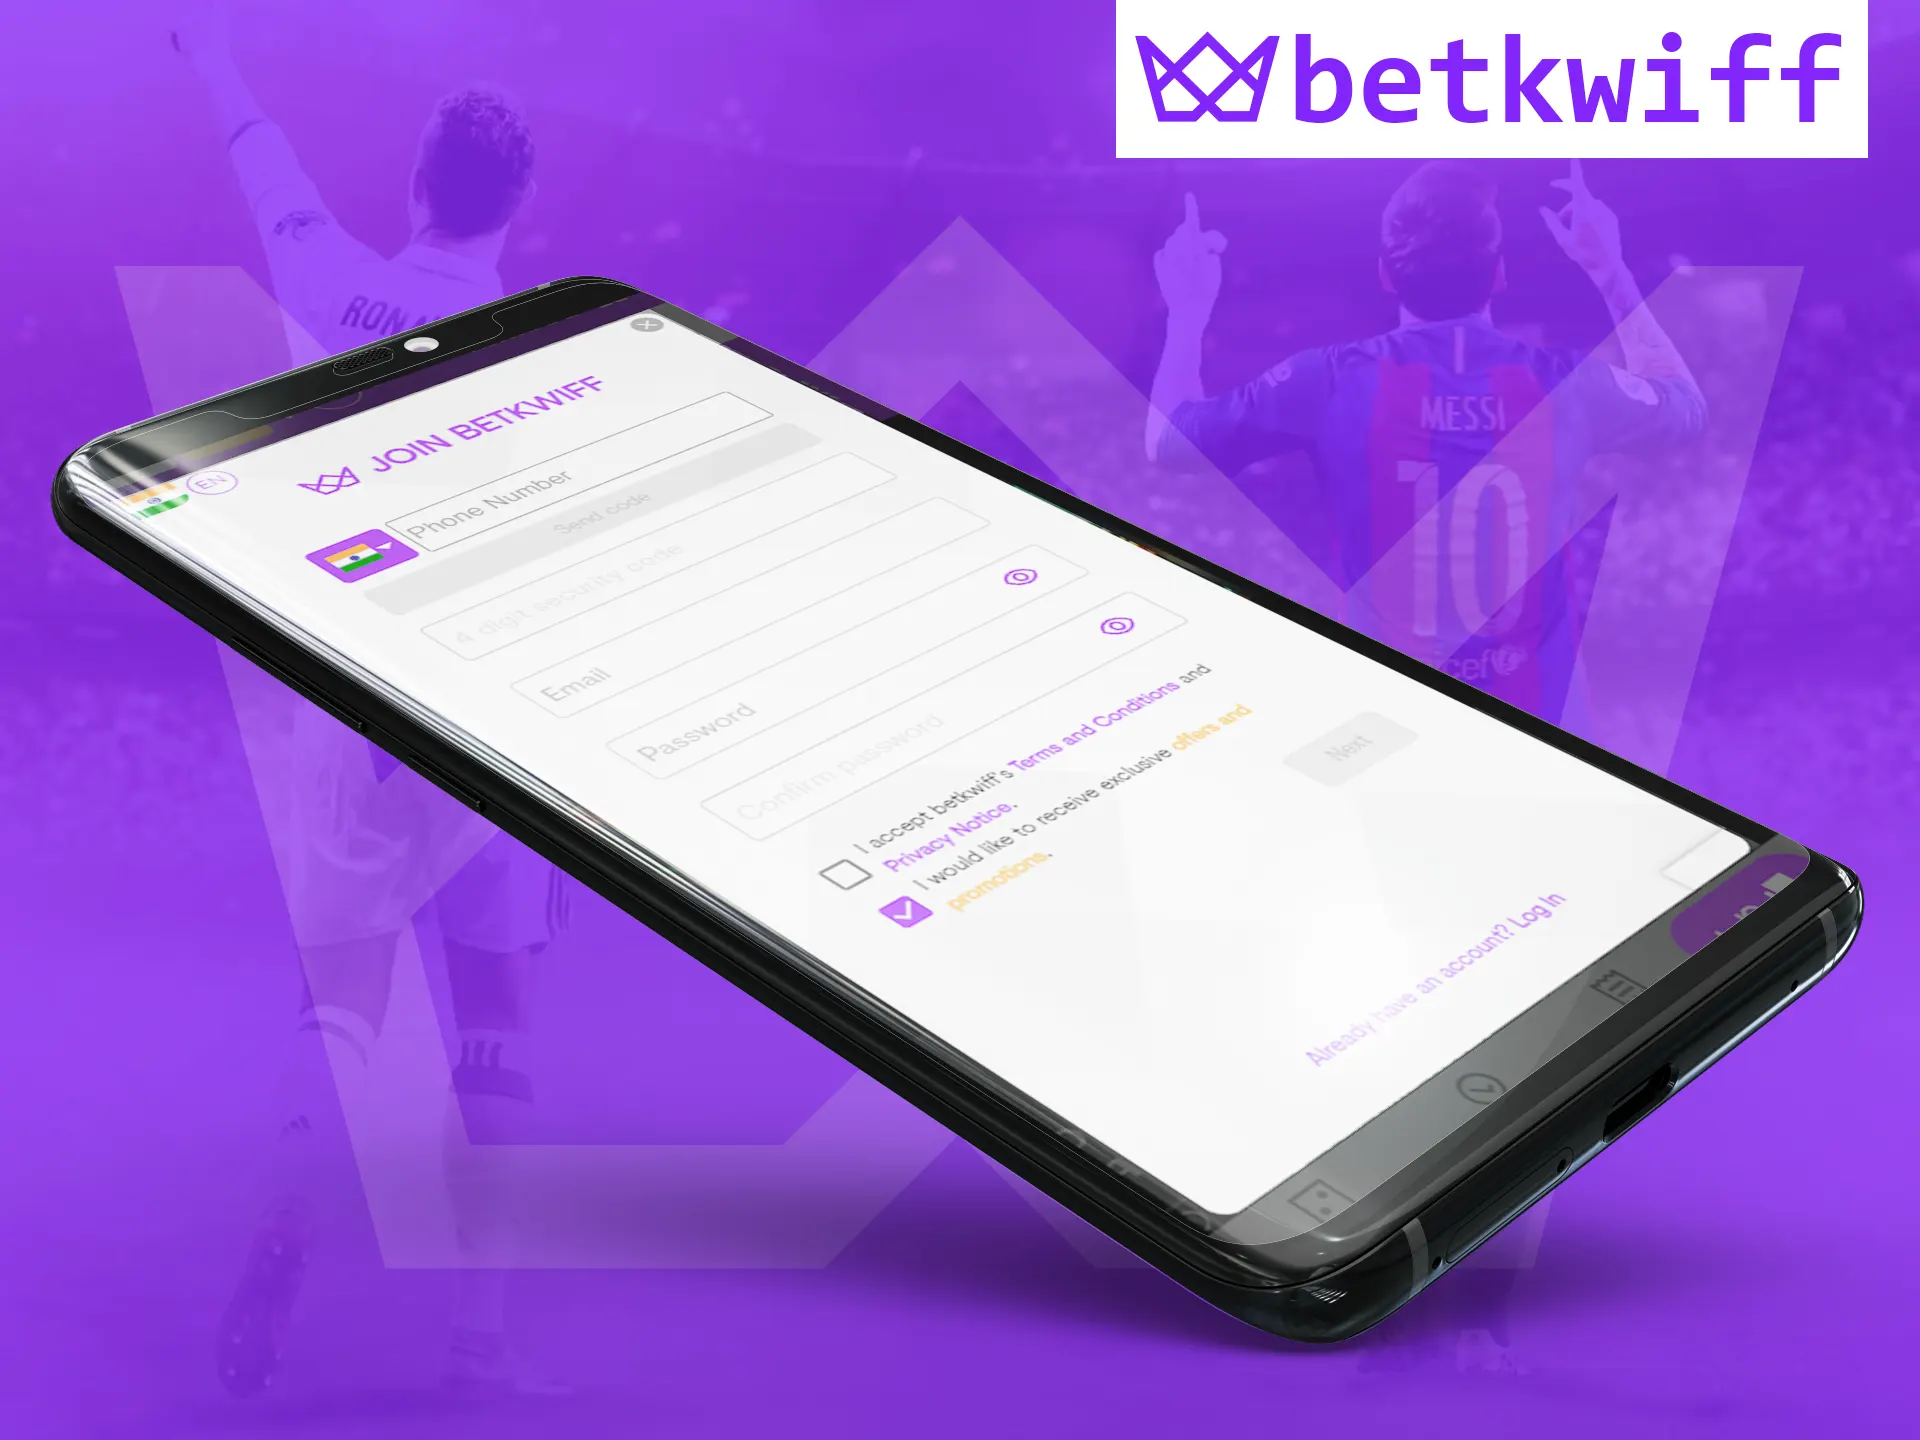 In the Betkwiff app, complete a simple registration process.